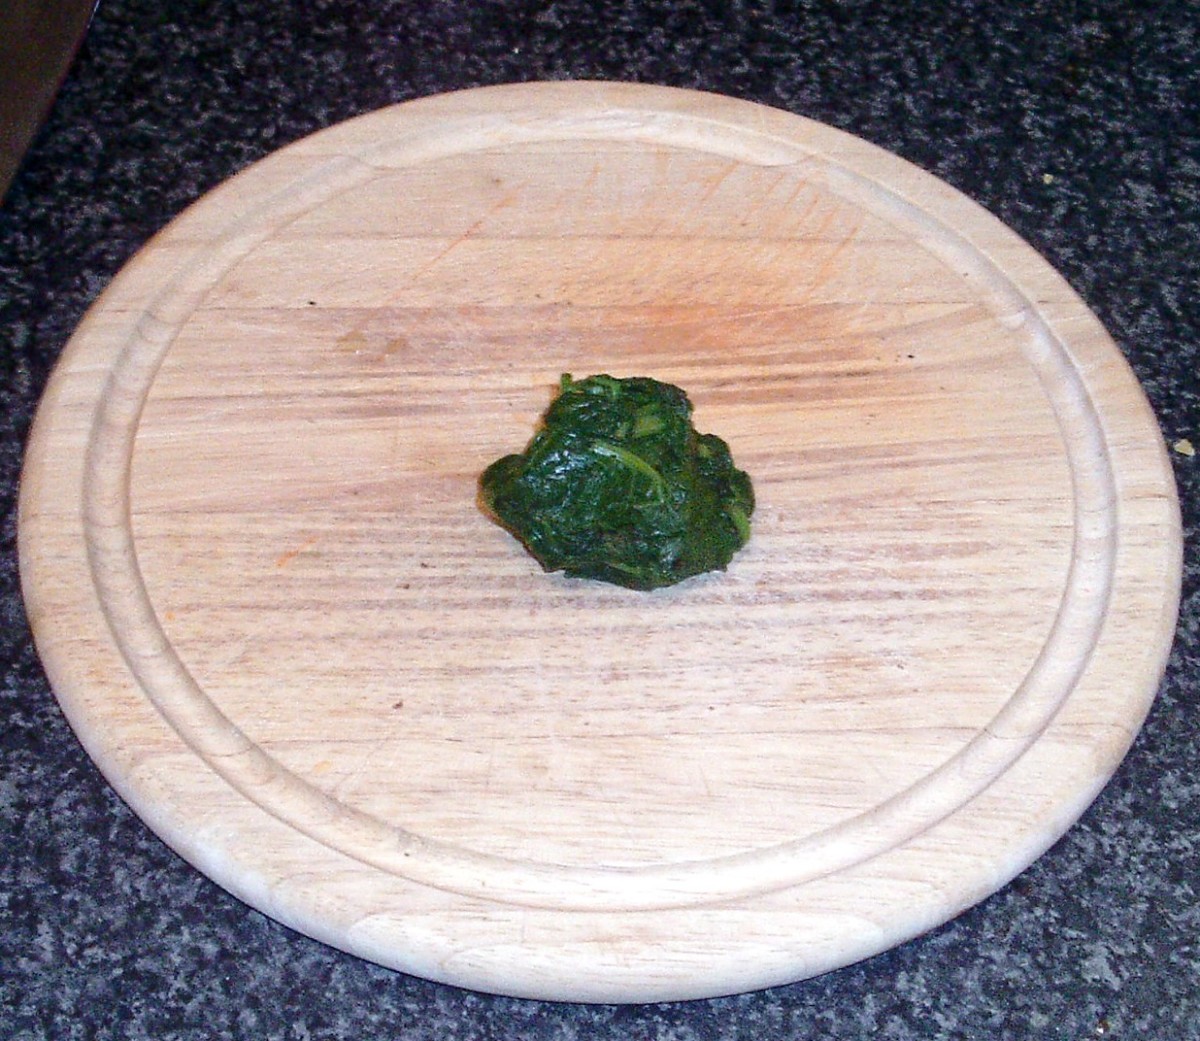 Spinach is squeezed of excess water and ready for chopping